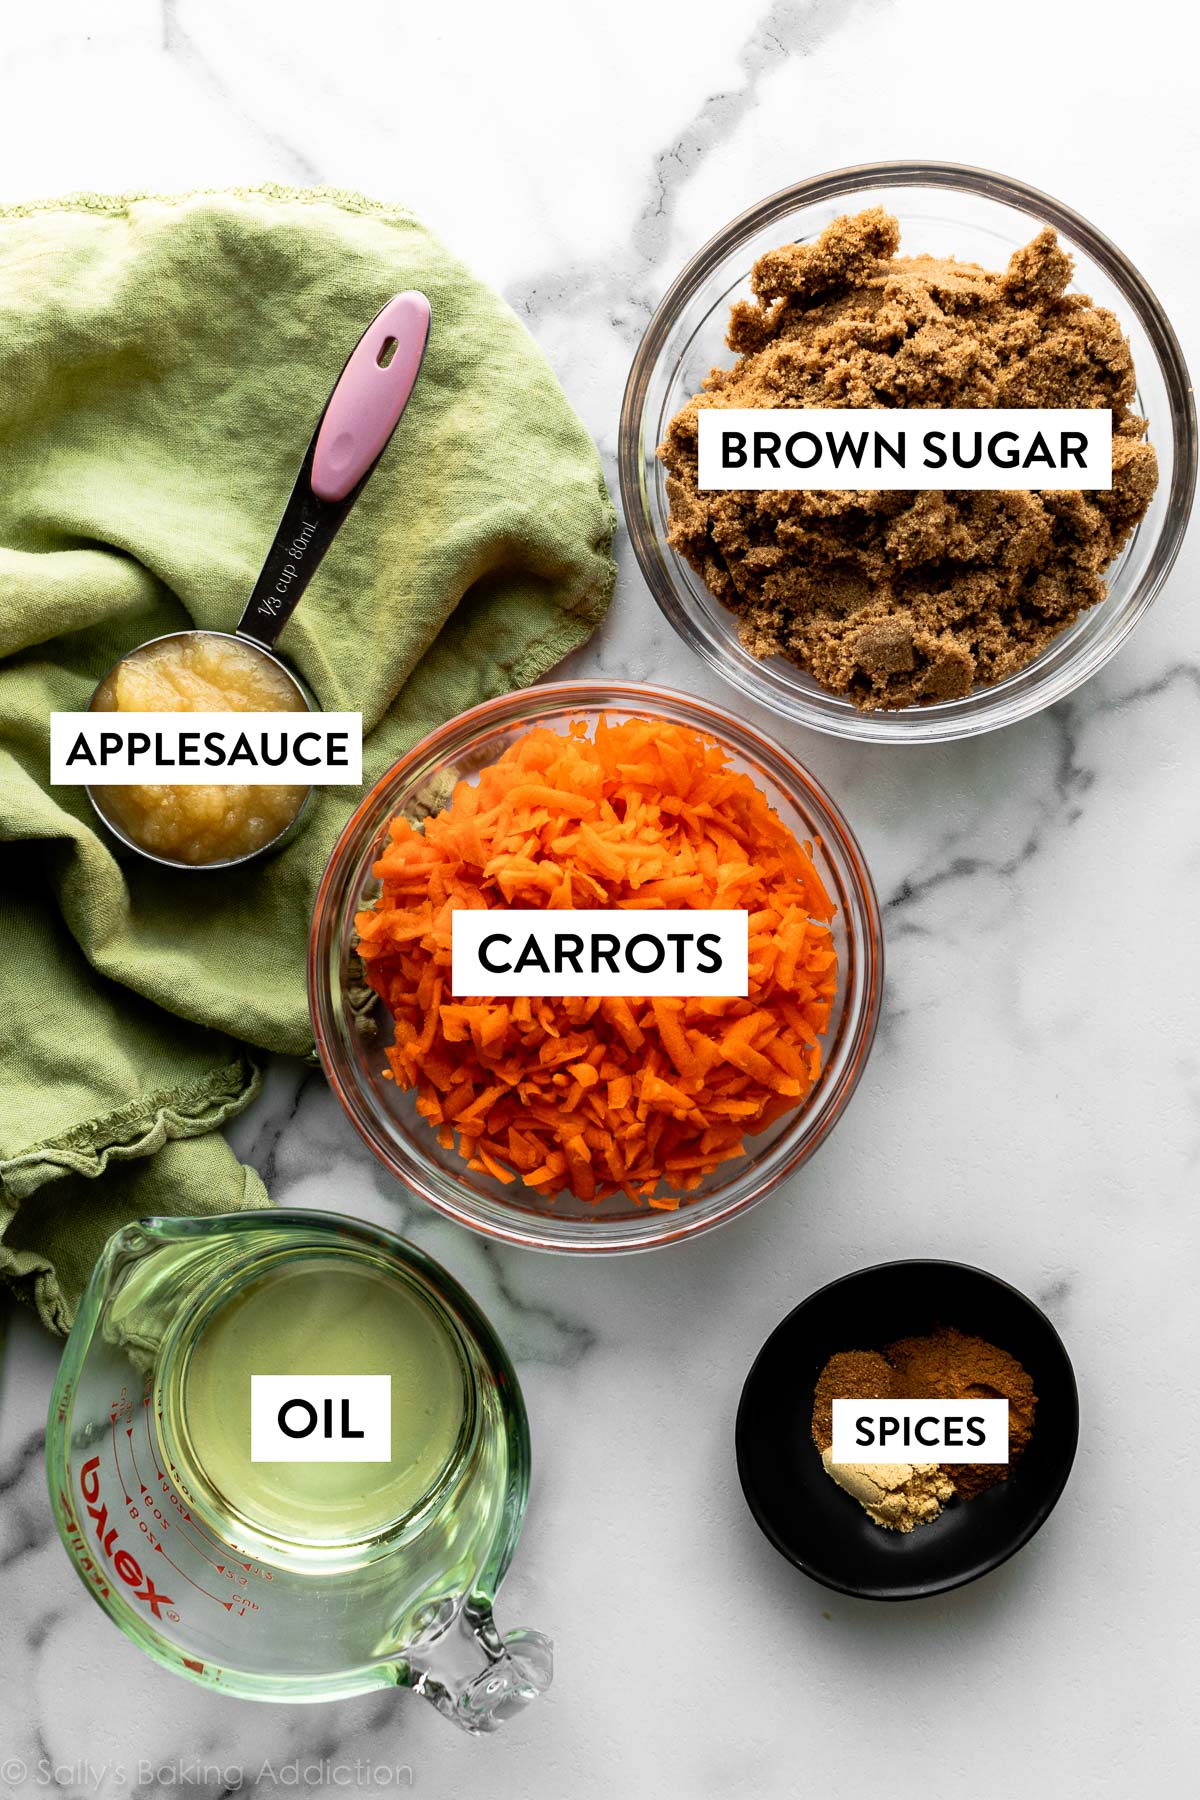 shredded carrots, brown sugar, spices, vegetable oil, and applesauce shown in bowls and measuring cups